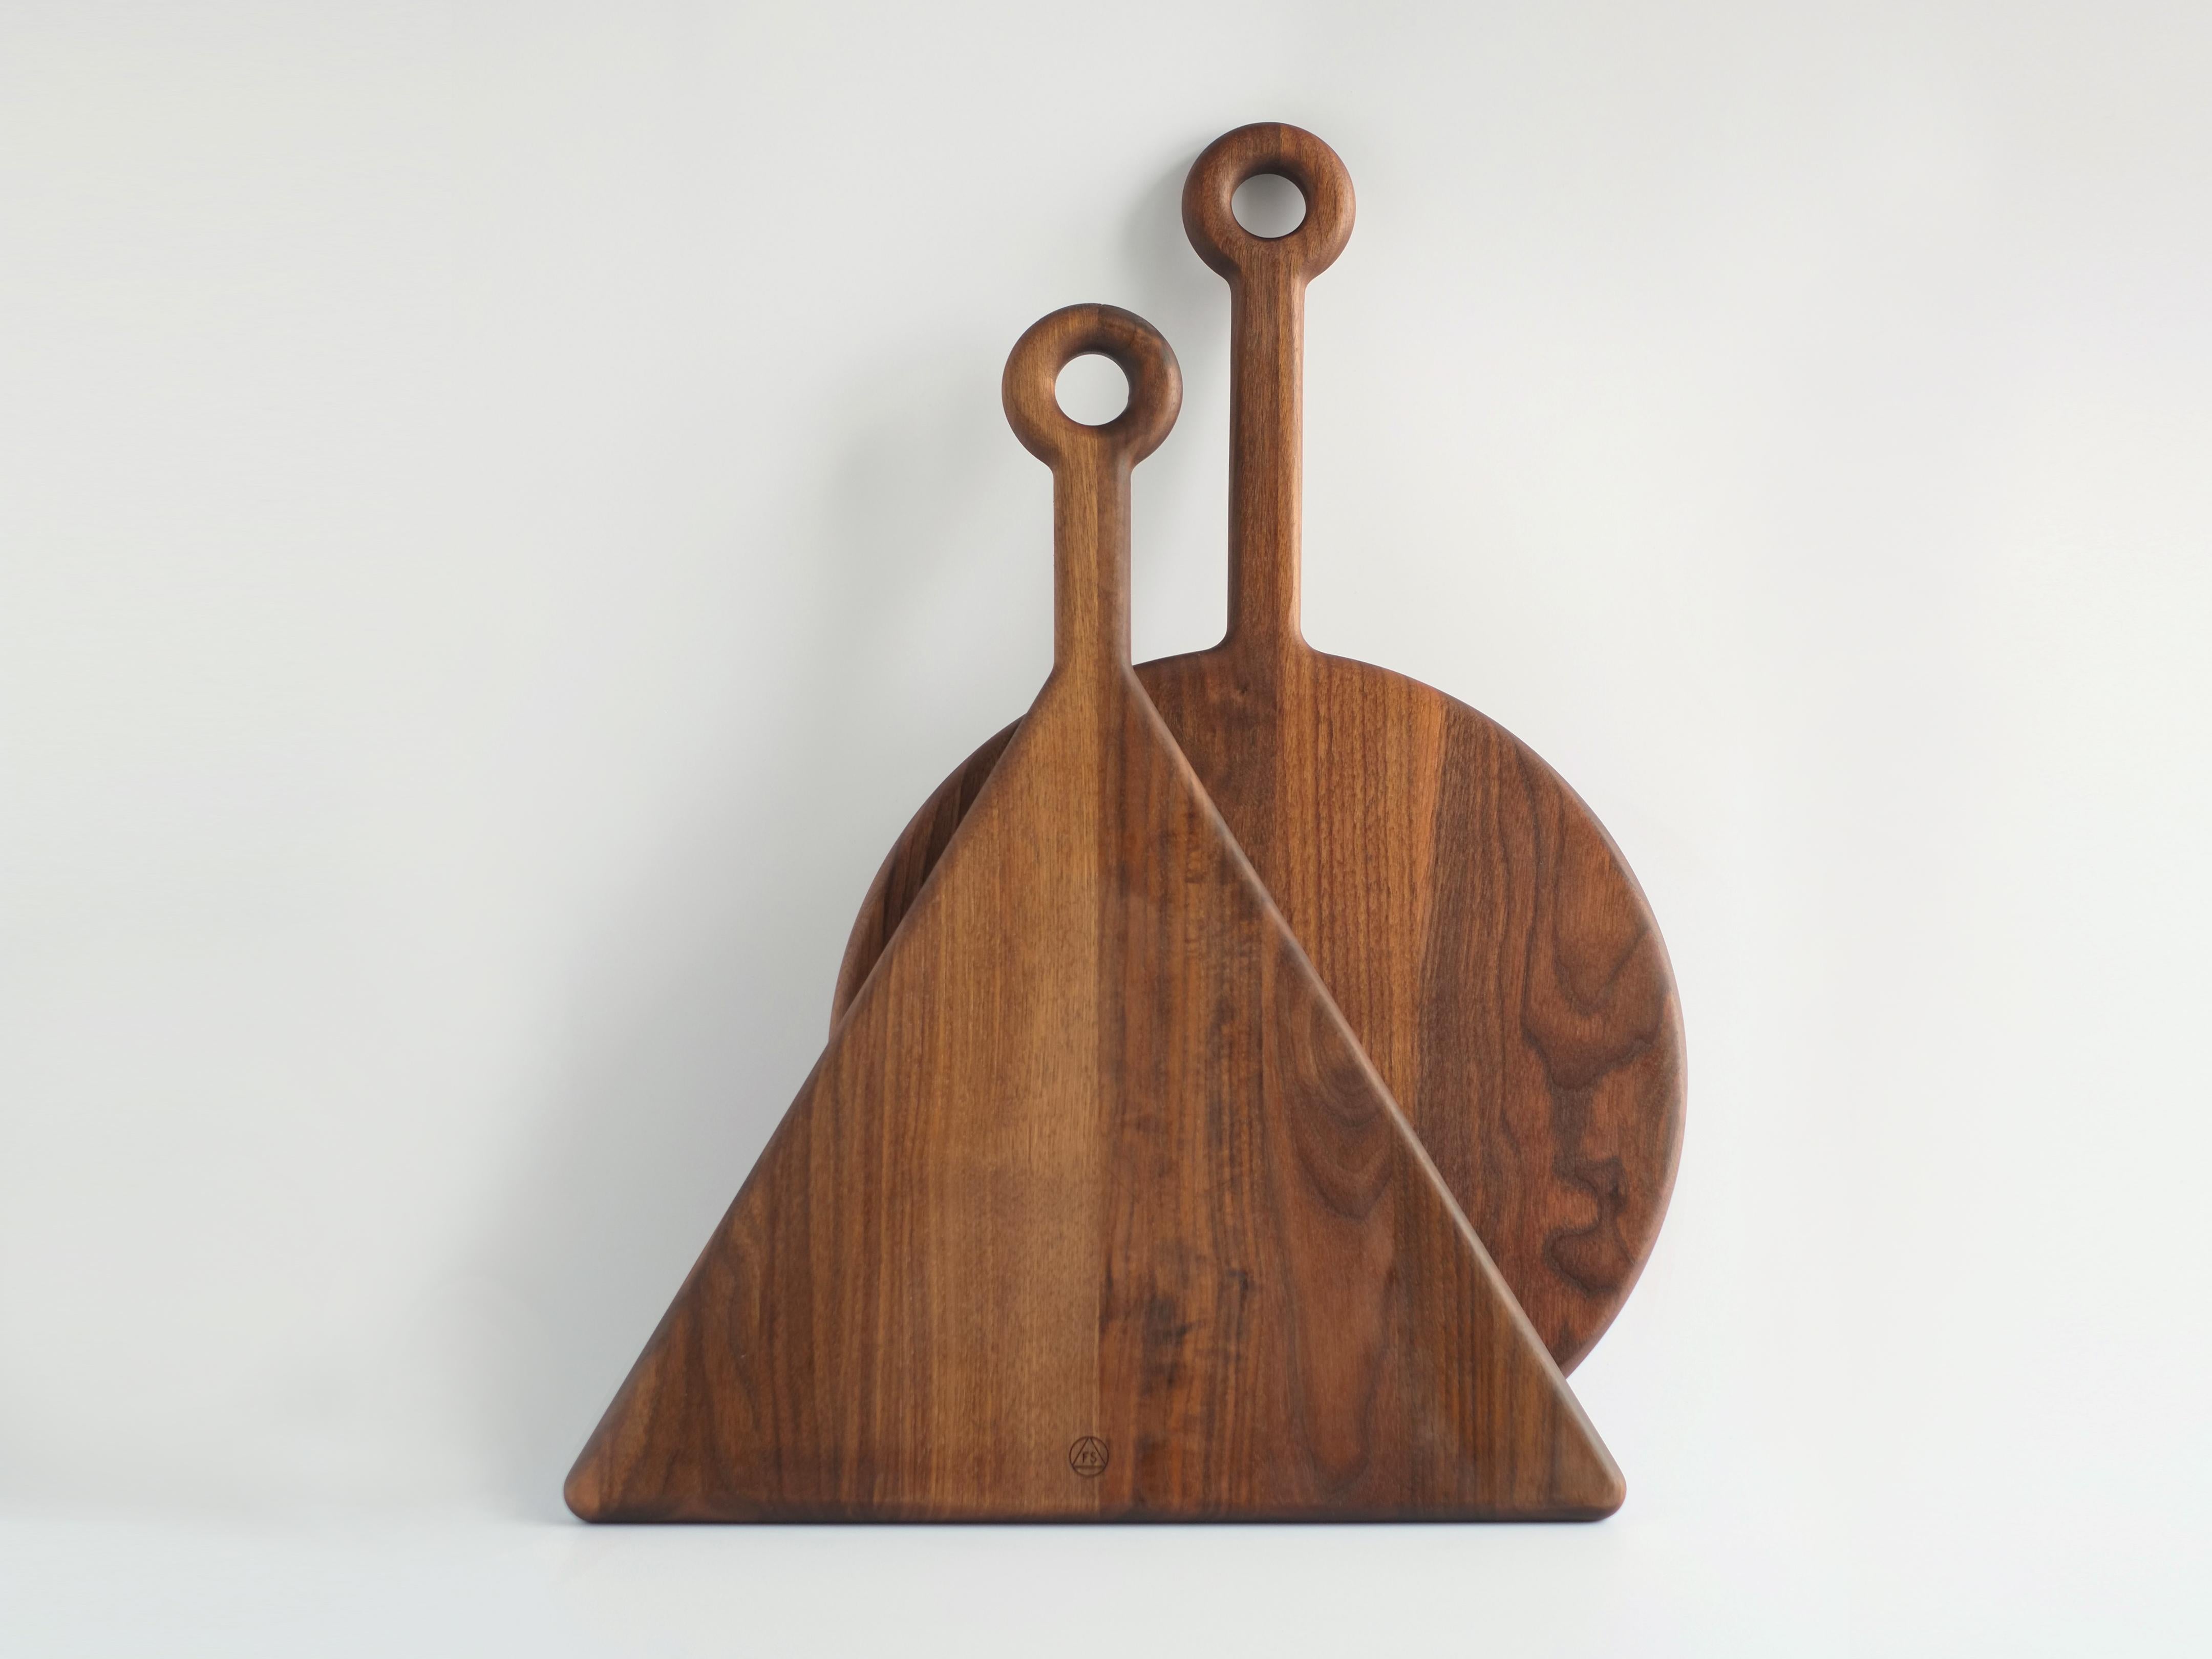 These American walnut and curly cutting boards are as beautiful displayed on the wall when not in use as they are when serving cheeses and hor d'oeuvers. 

The large, donut-like hanging hole allows each Plank to rest on almost any hook or nail,